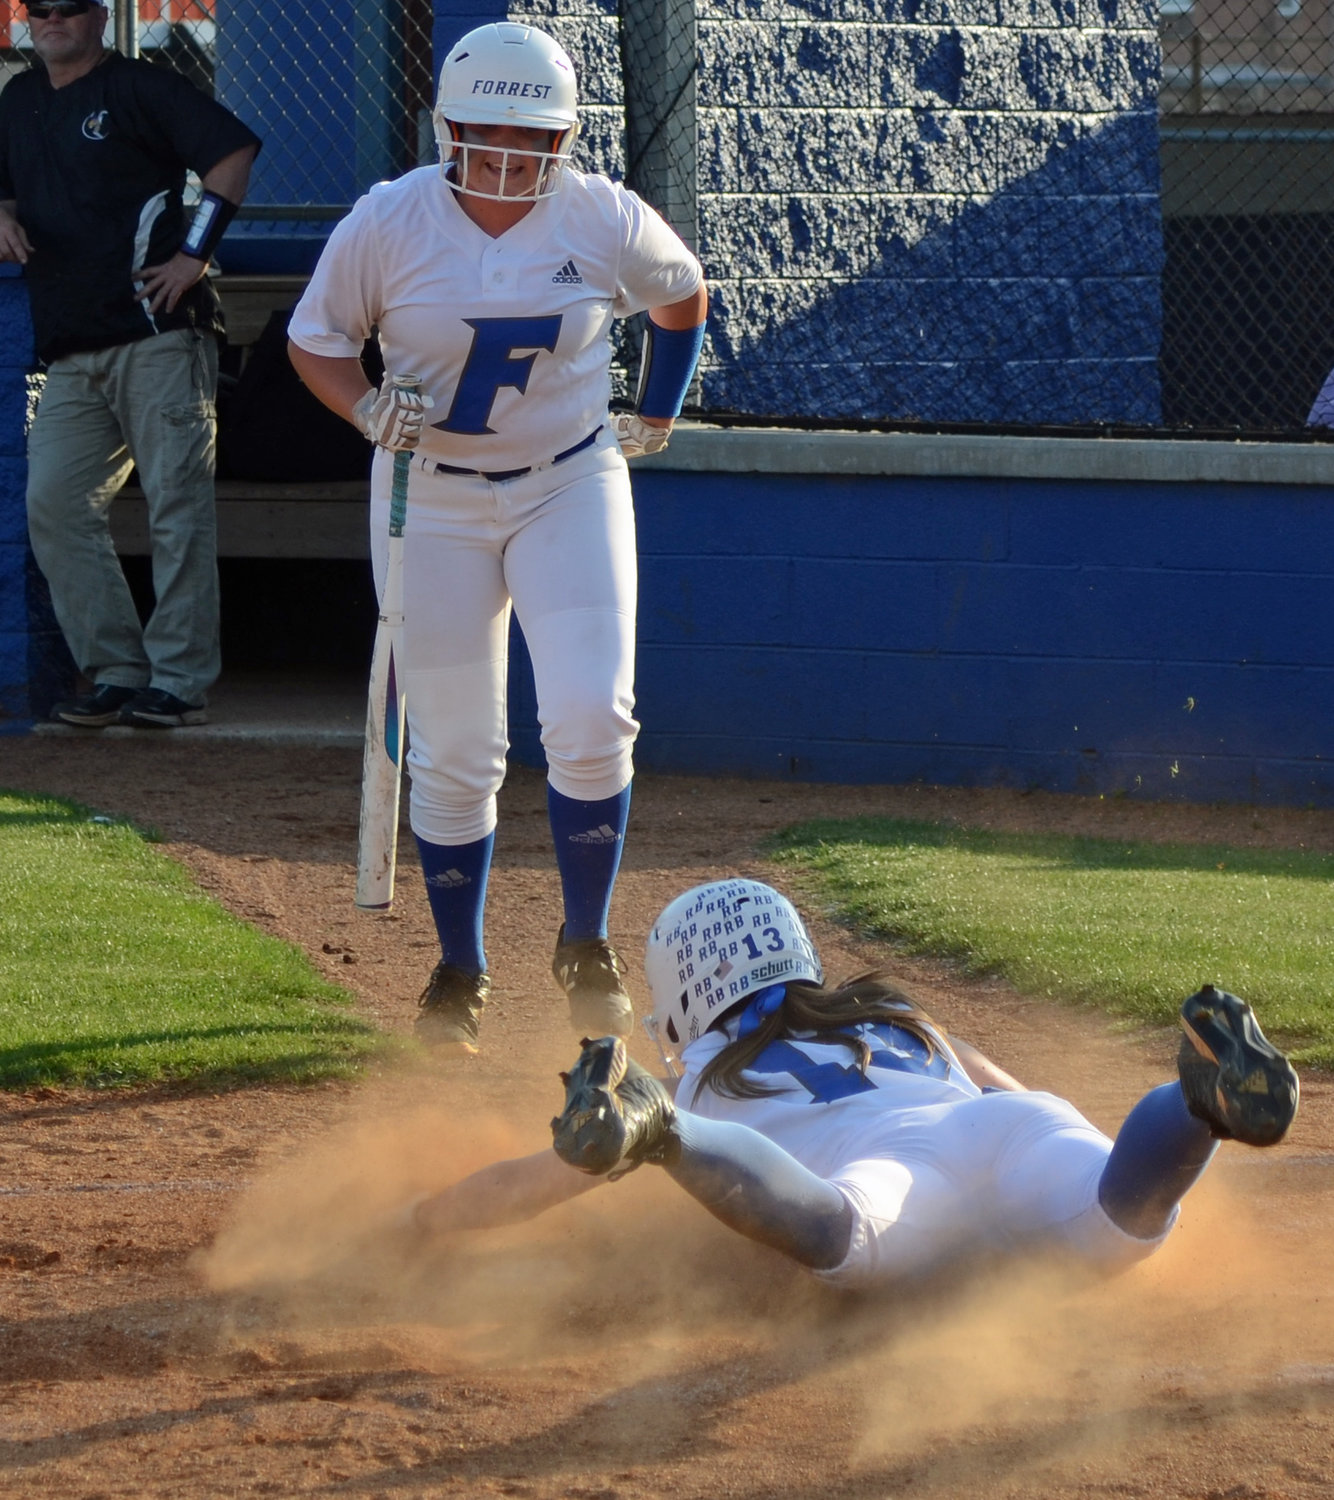 Addison Bunty slides head first to home after rounding the bases in the first inning.